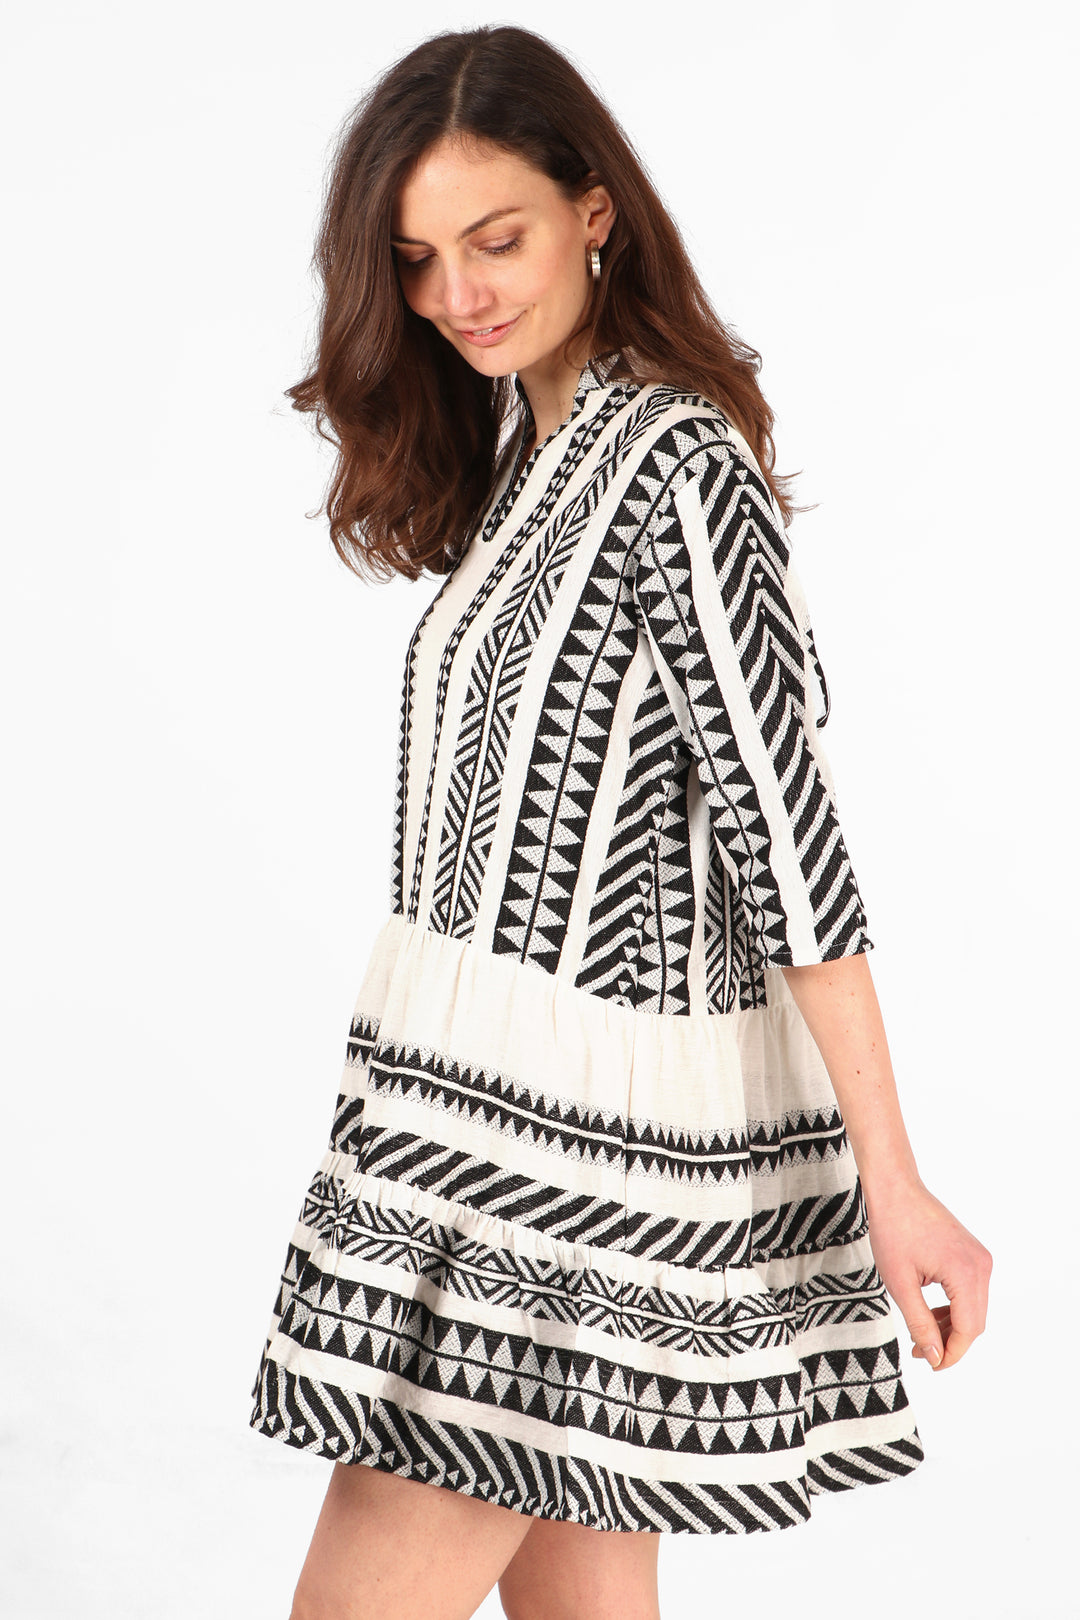 model showing the side view of the mini dress, showing the 3/4 sleeves and black and white aztec pattern